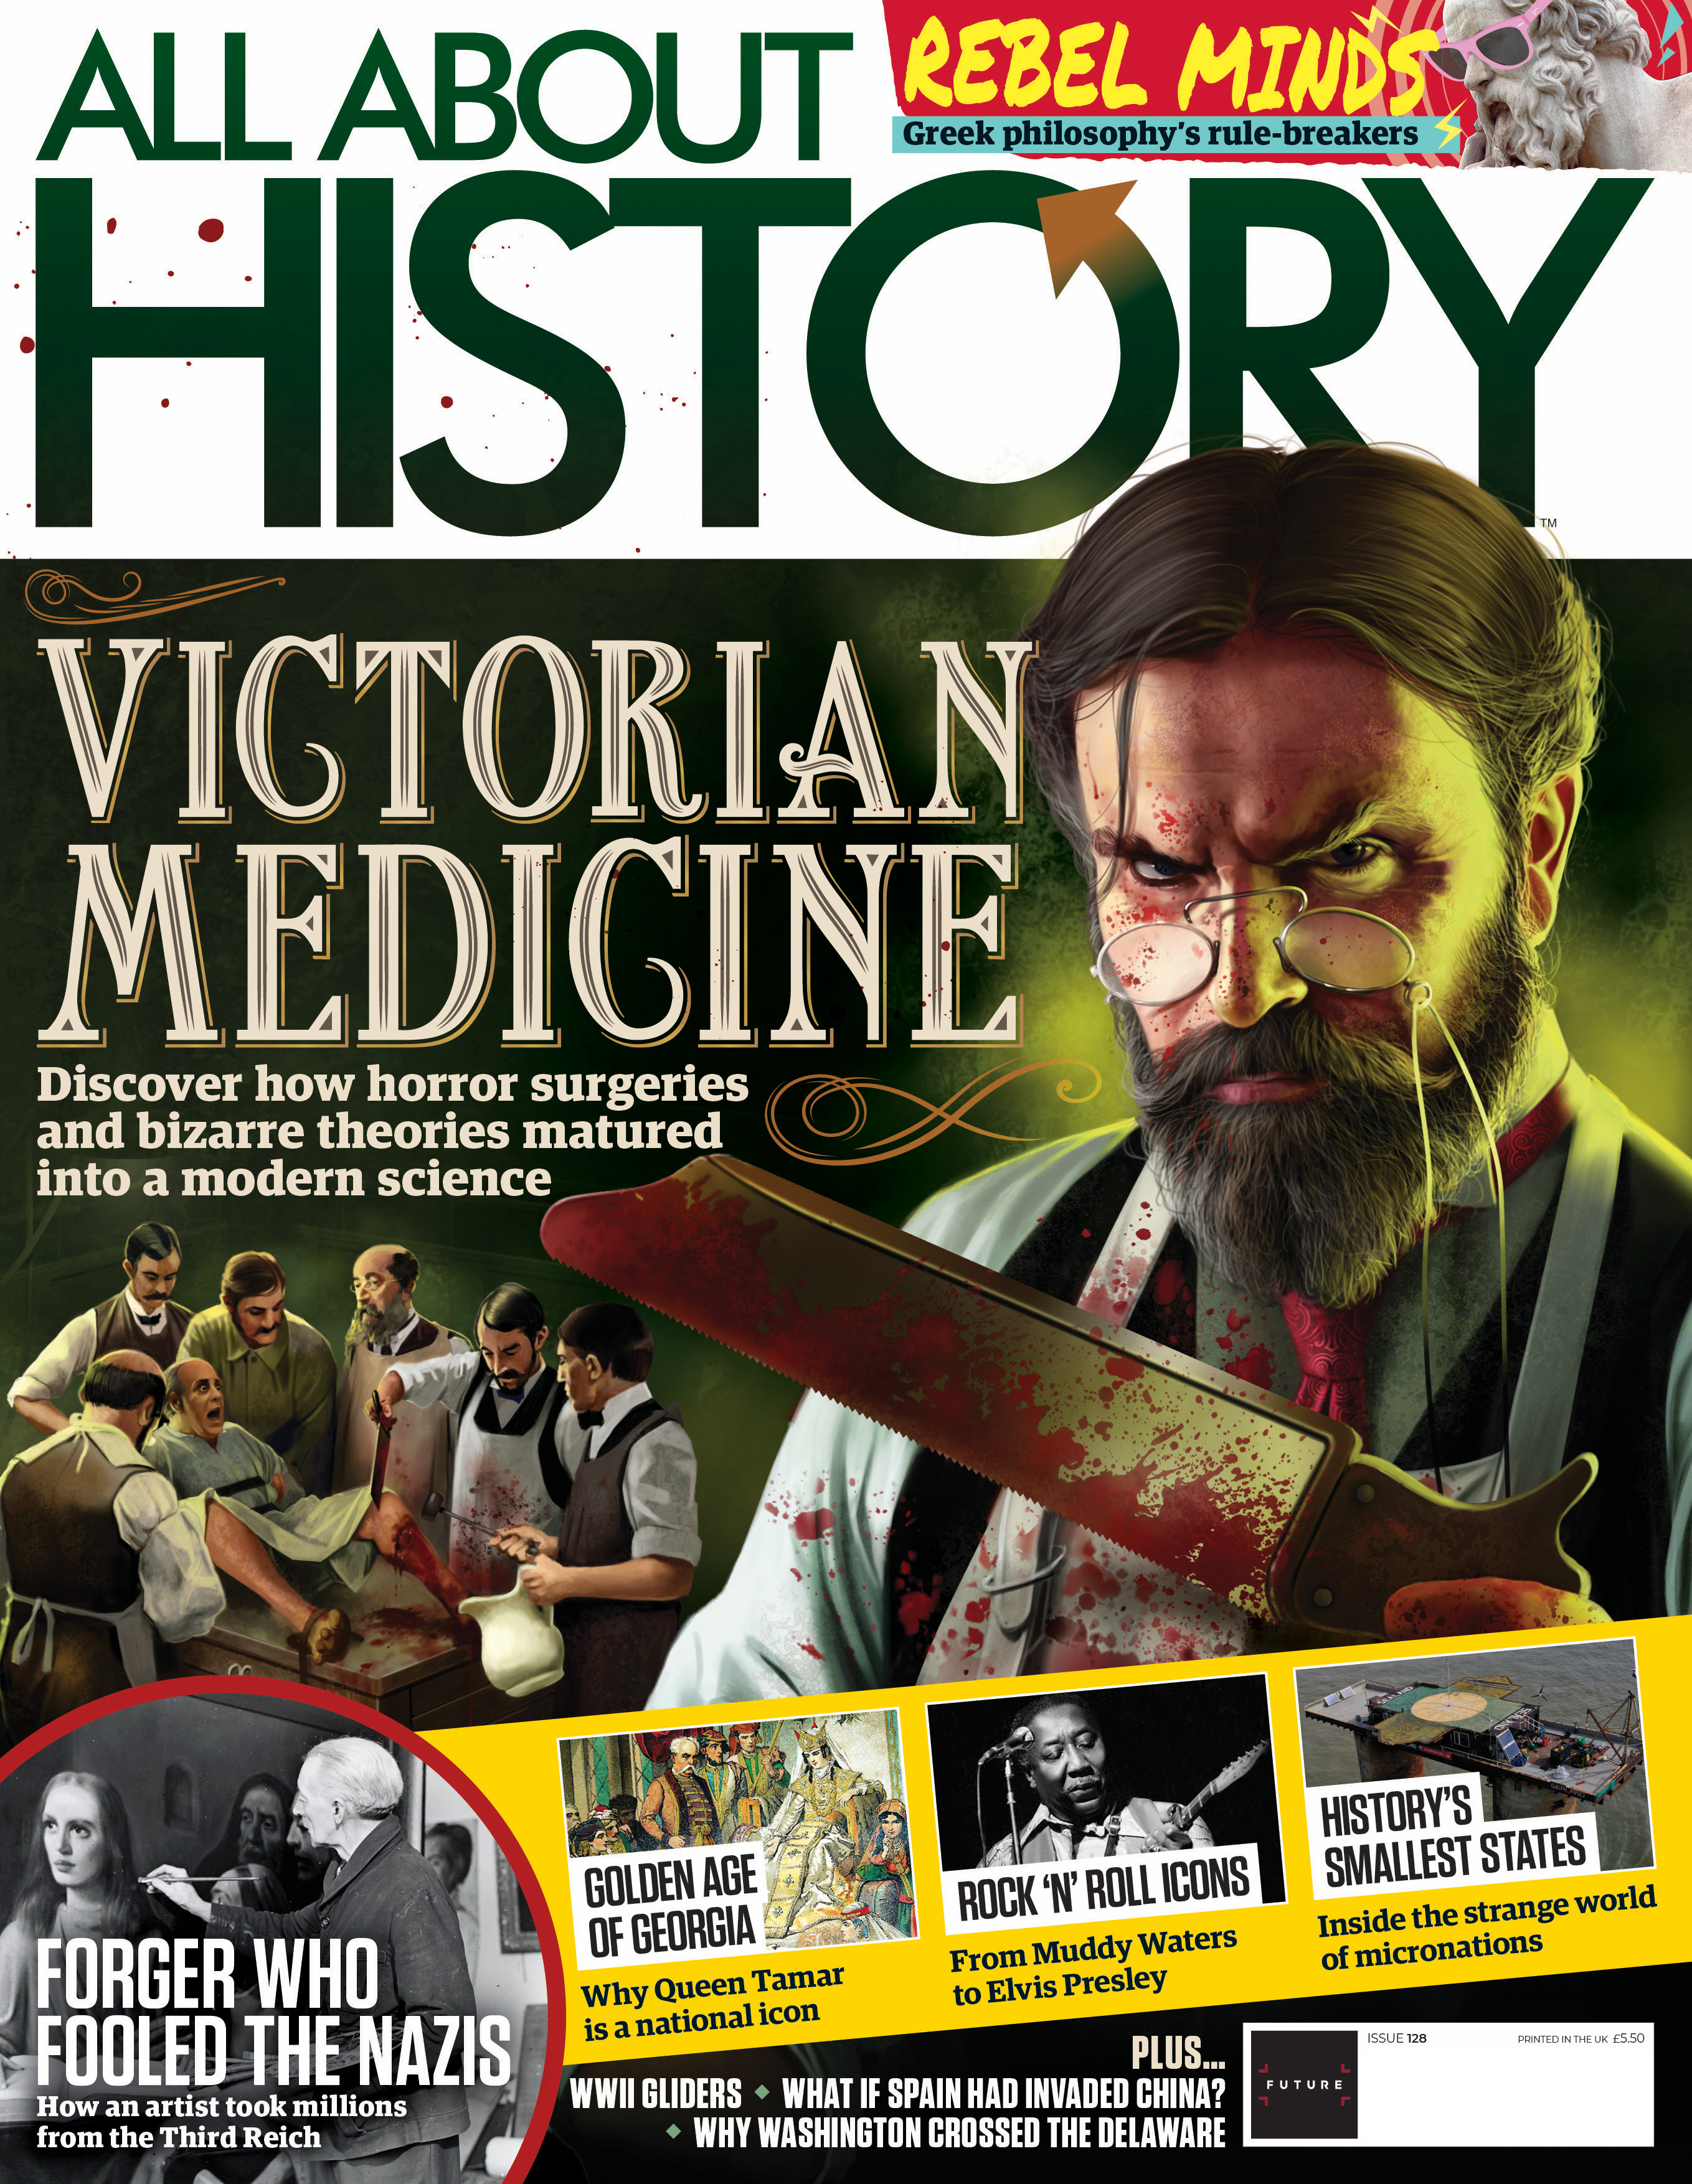 All of history 128 covers